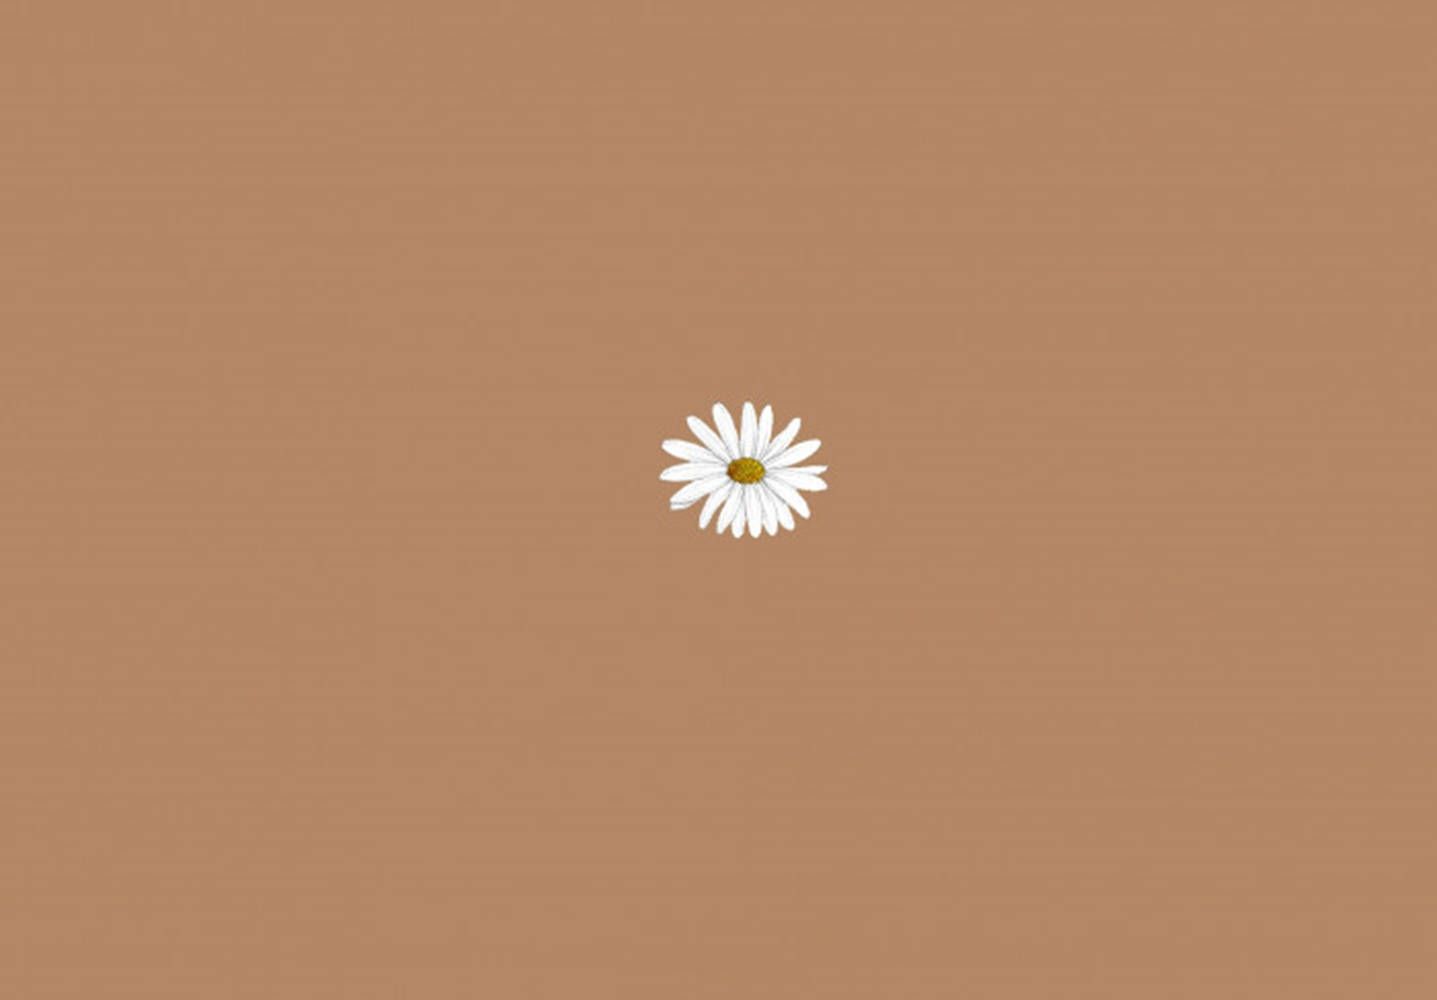 A white daisy on a brown background - Brown